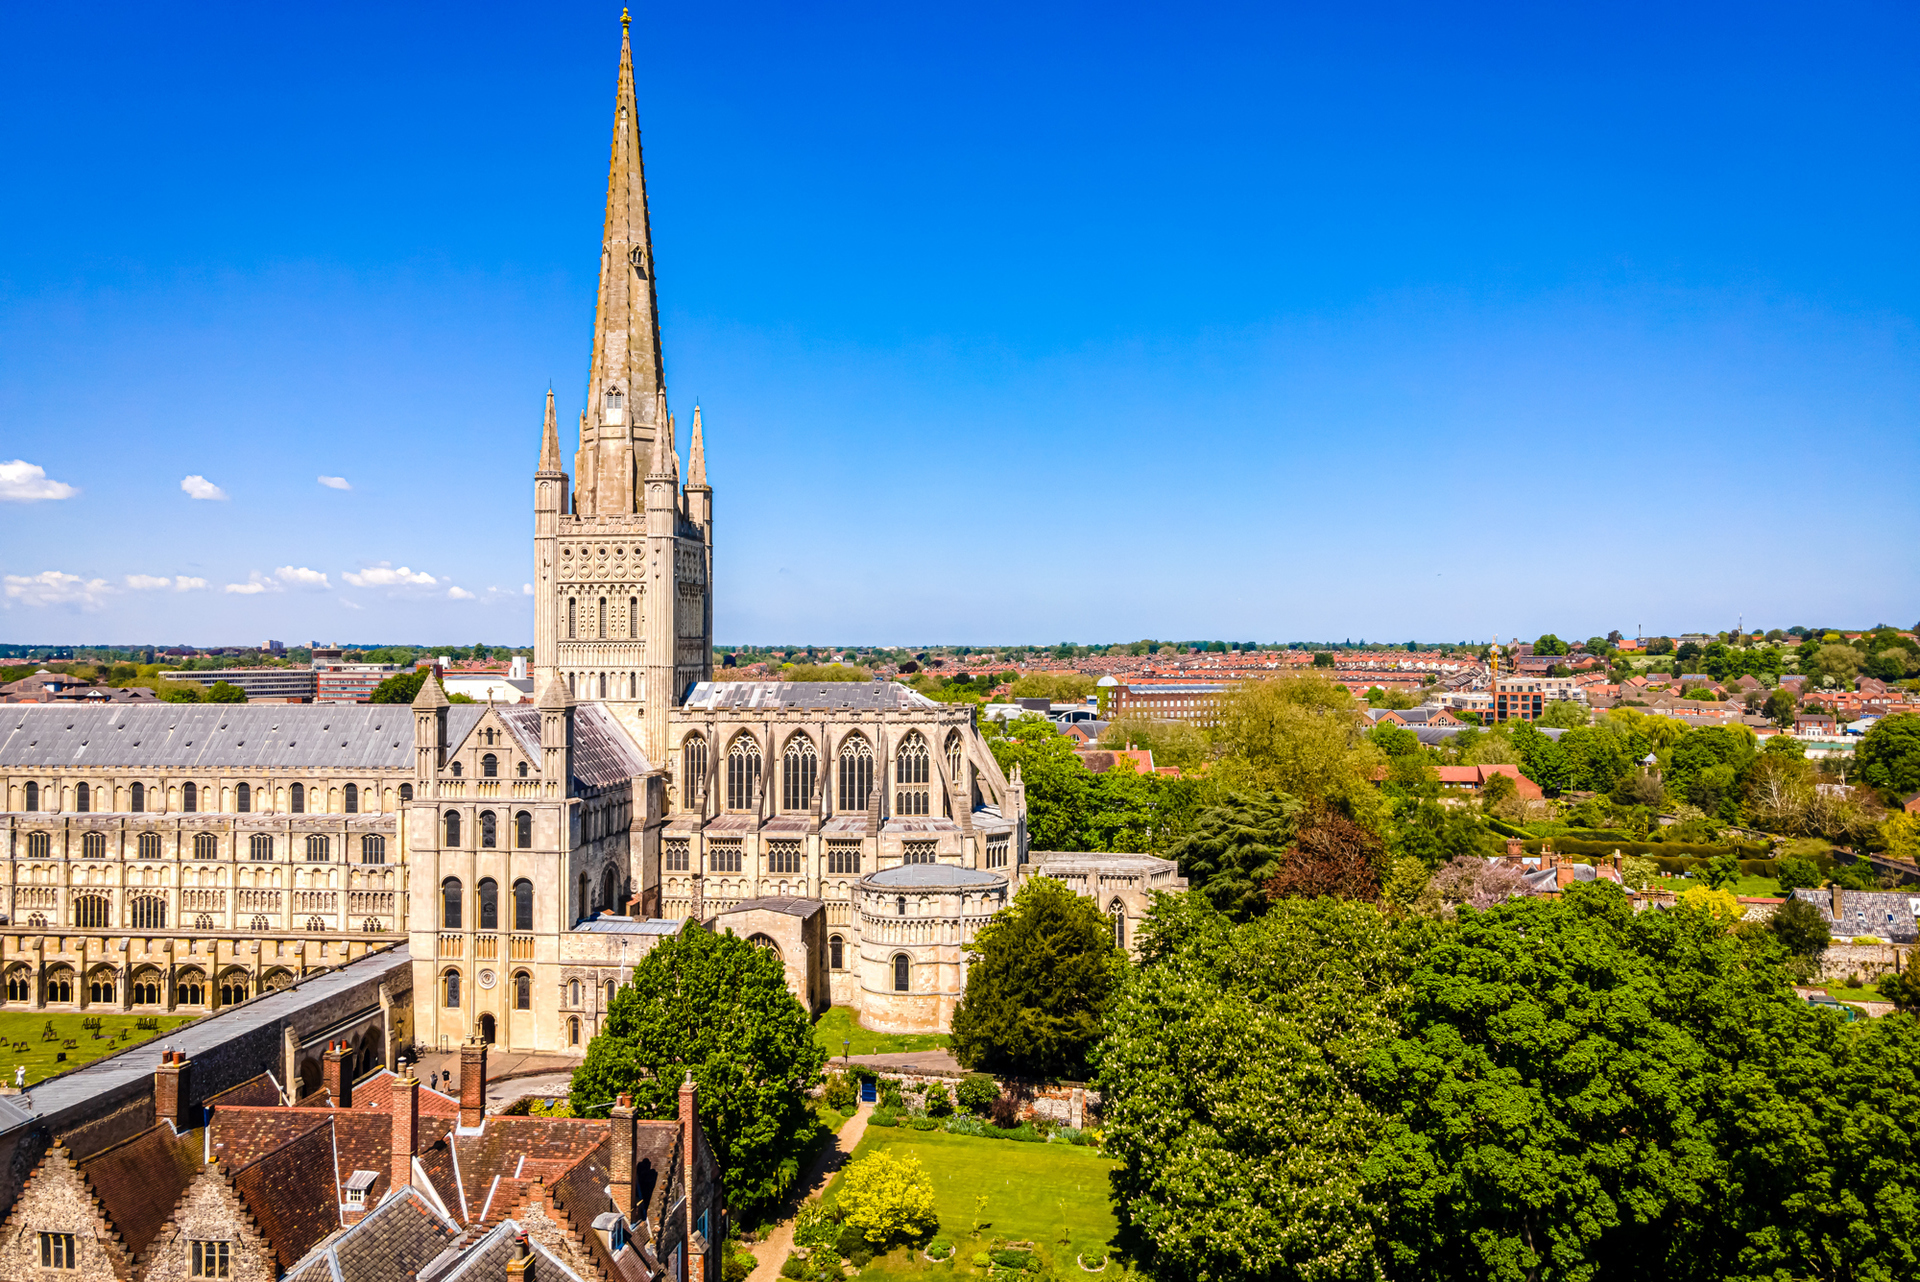 Norwich from a birds-eye point of view